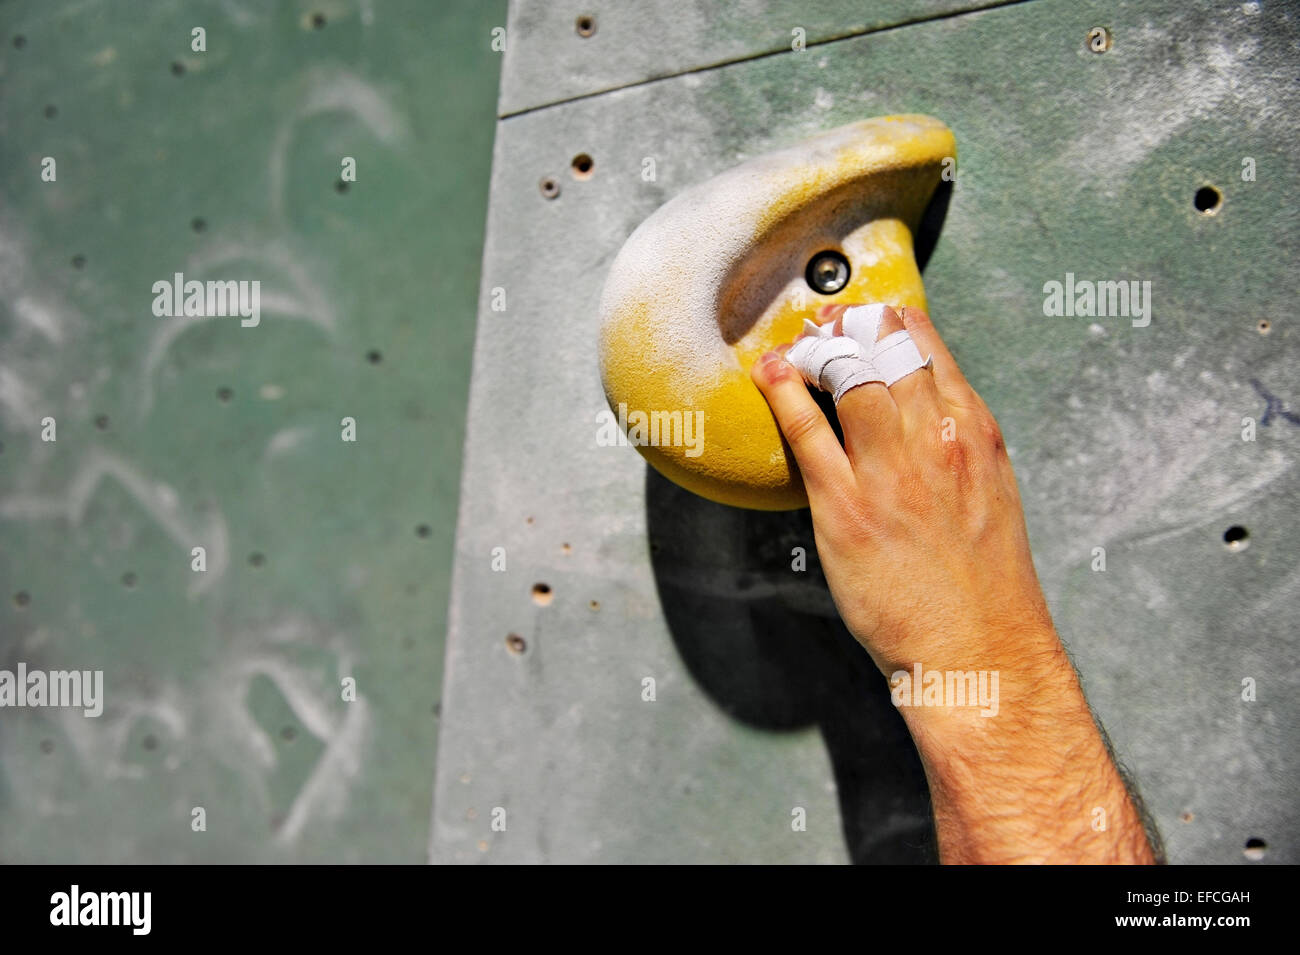 Detail with climber injured hand on artificial indoor climbing wall Stock Photo